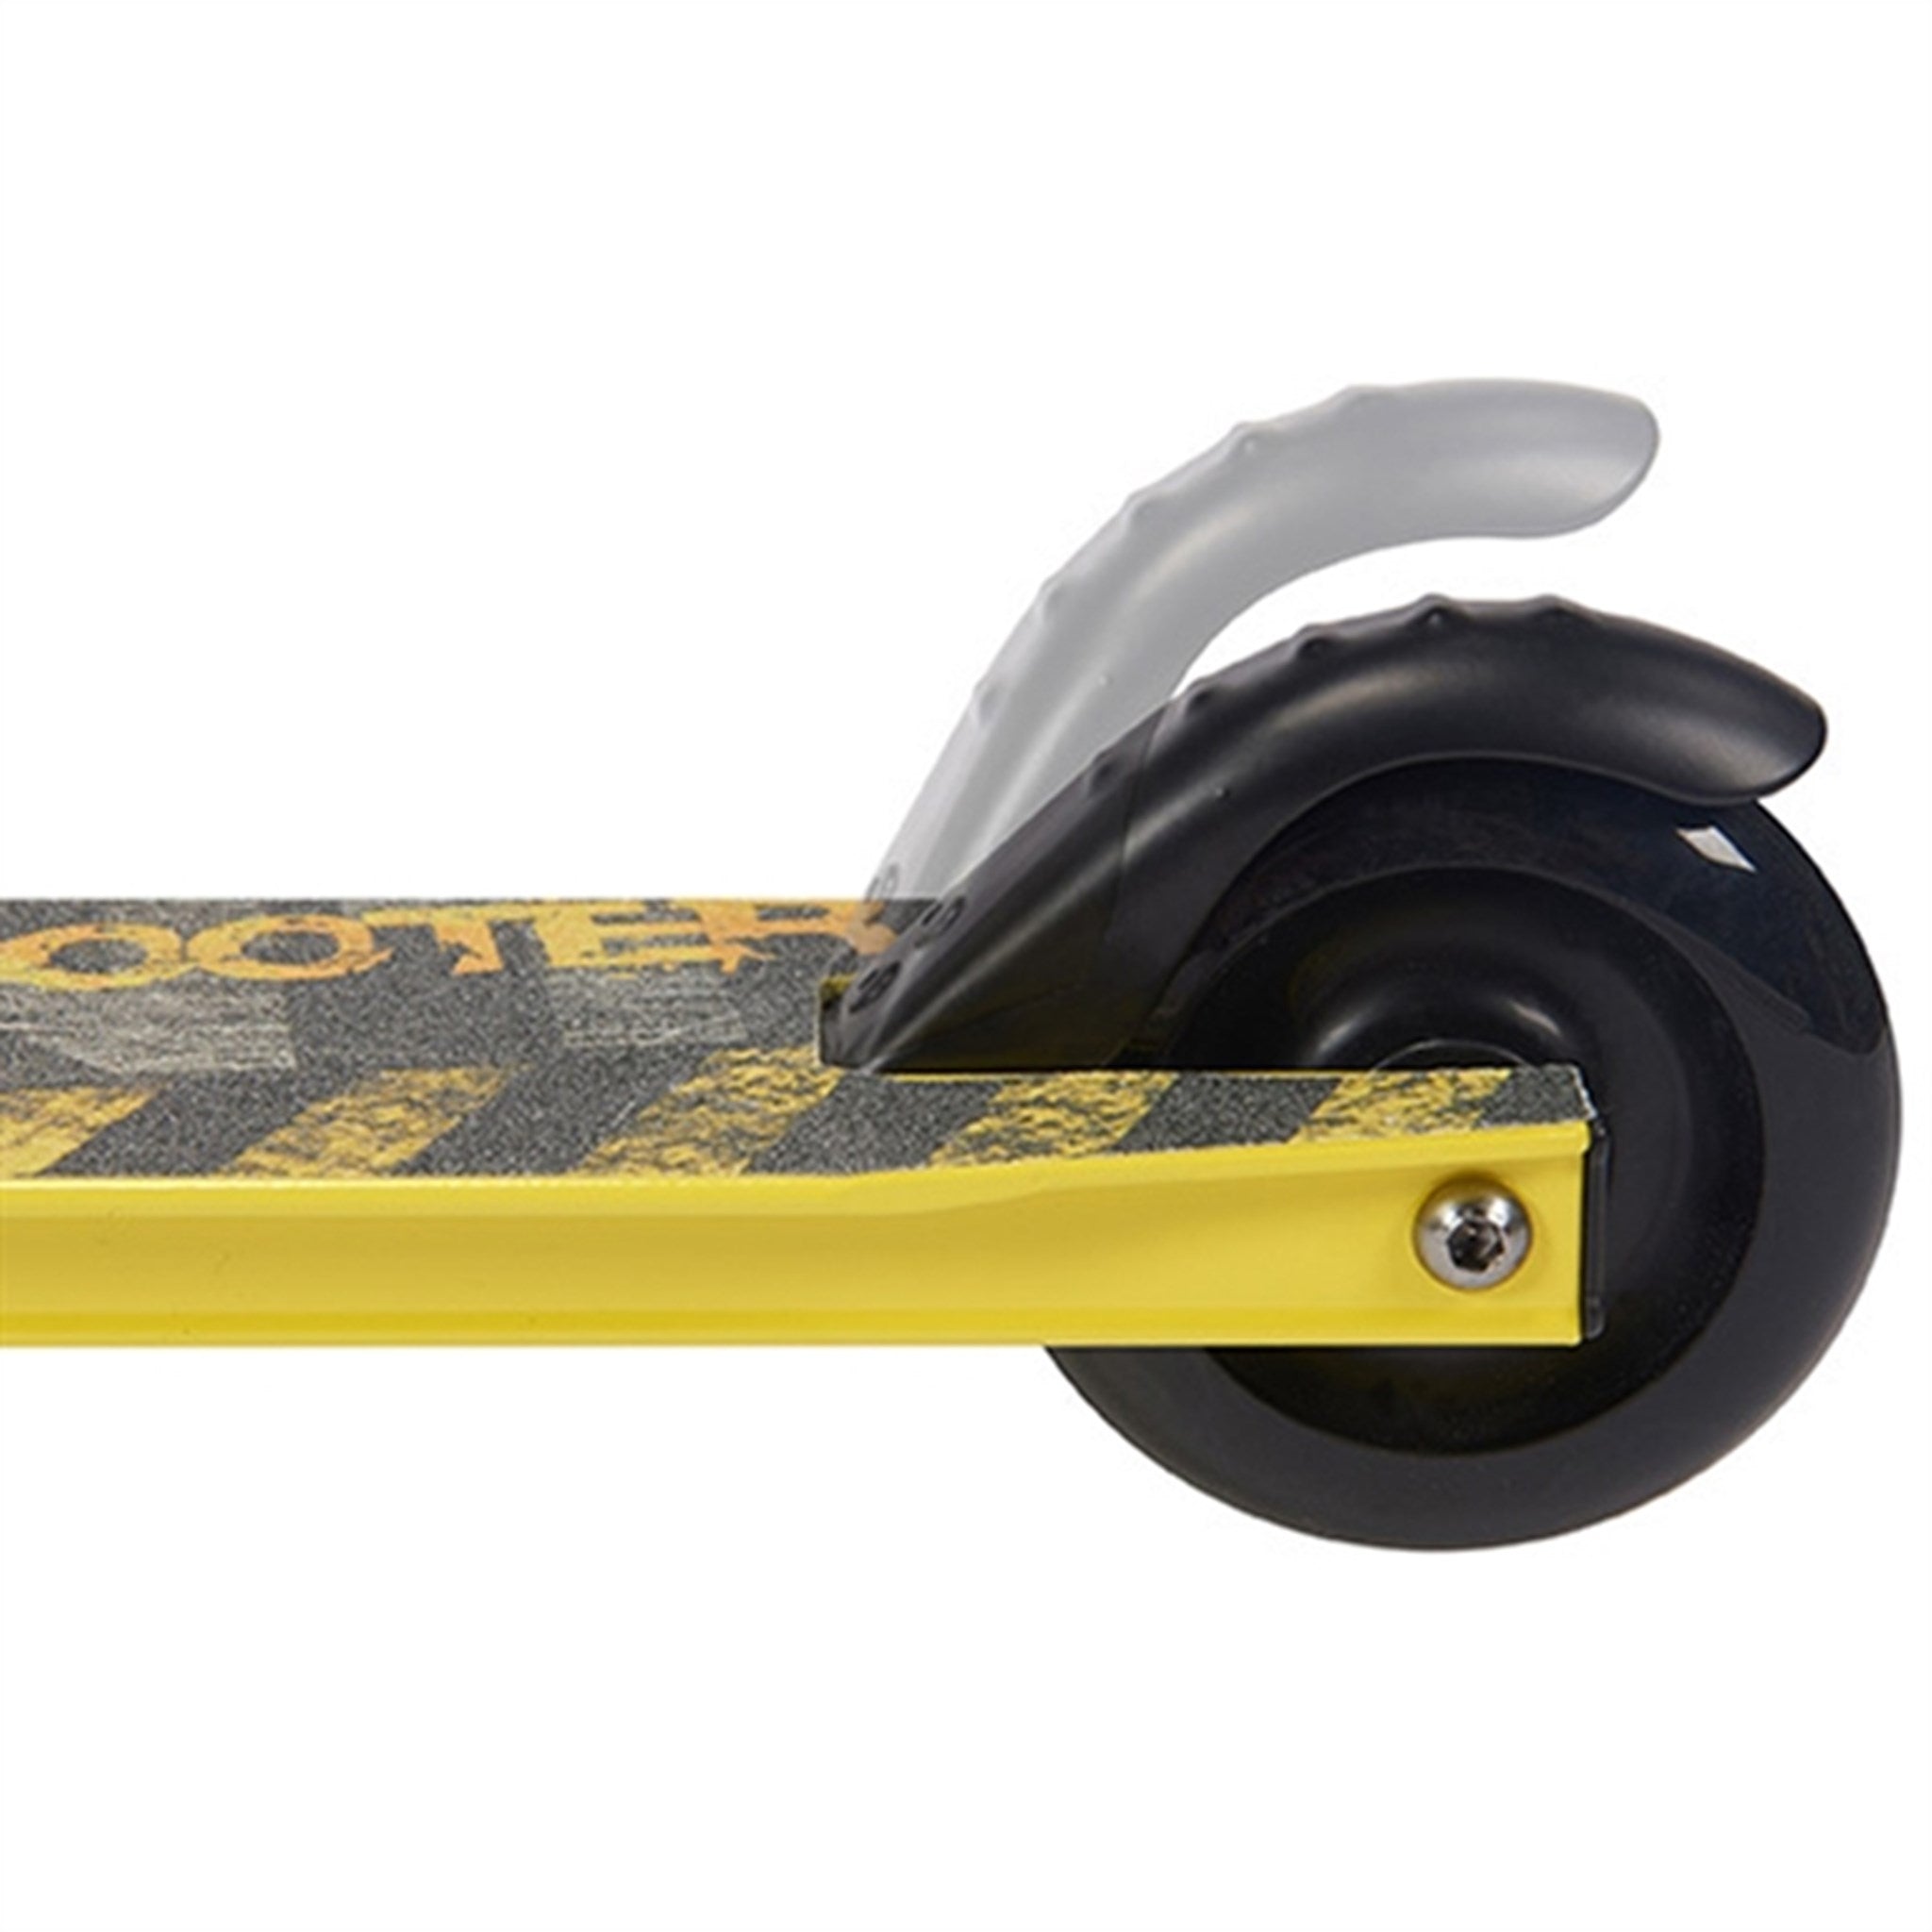 Skids Control Stunt Scooter Yellow 3